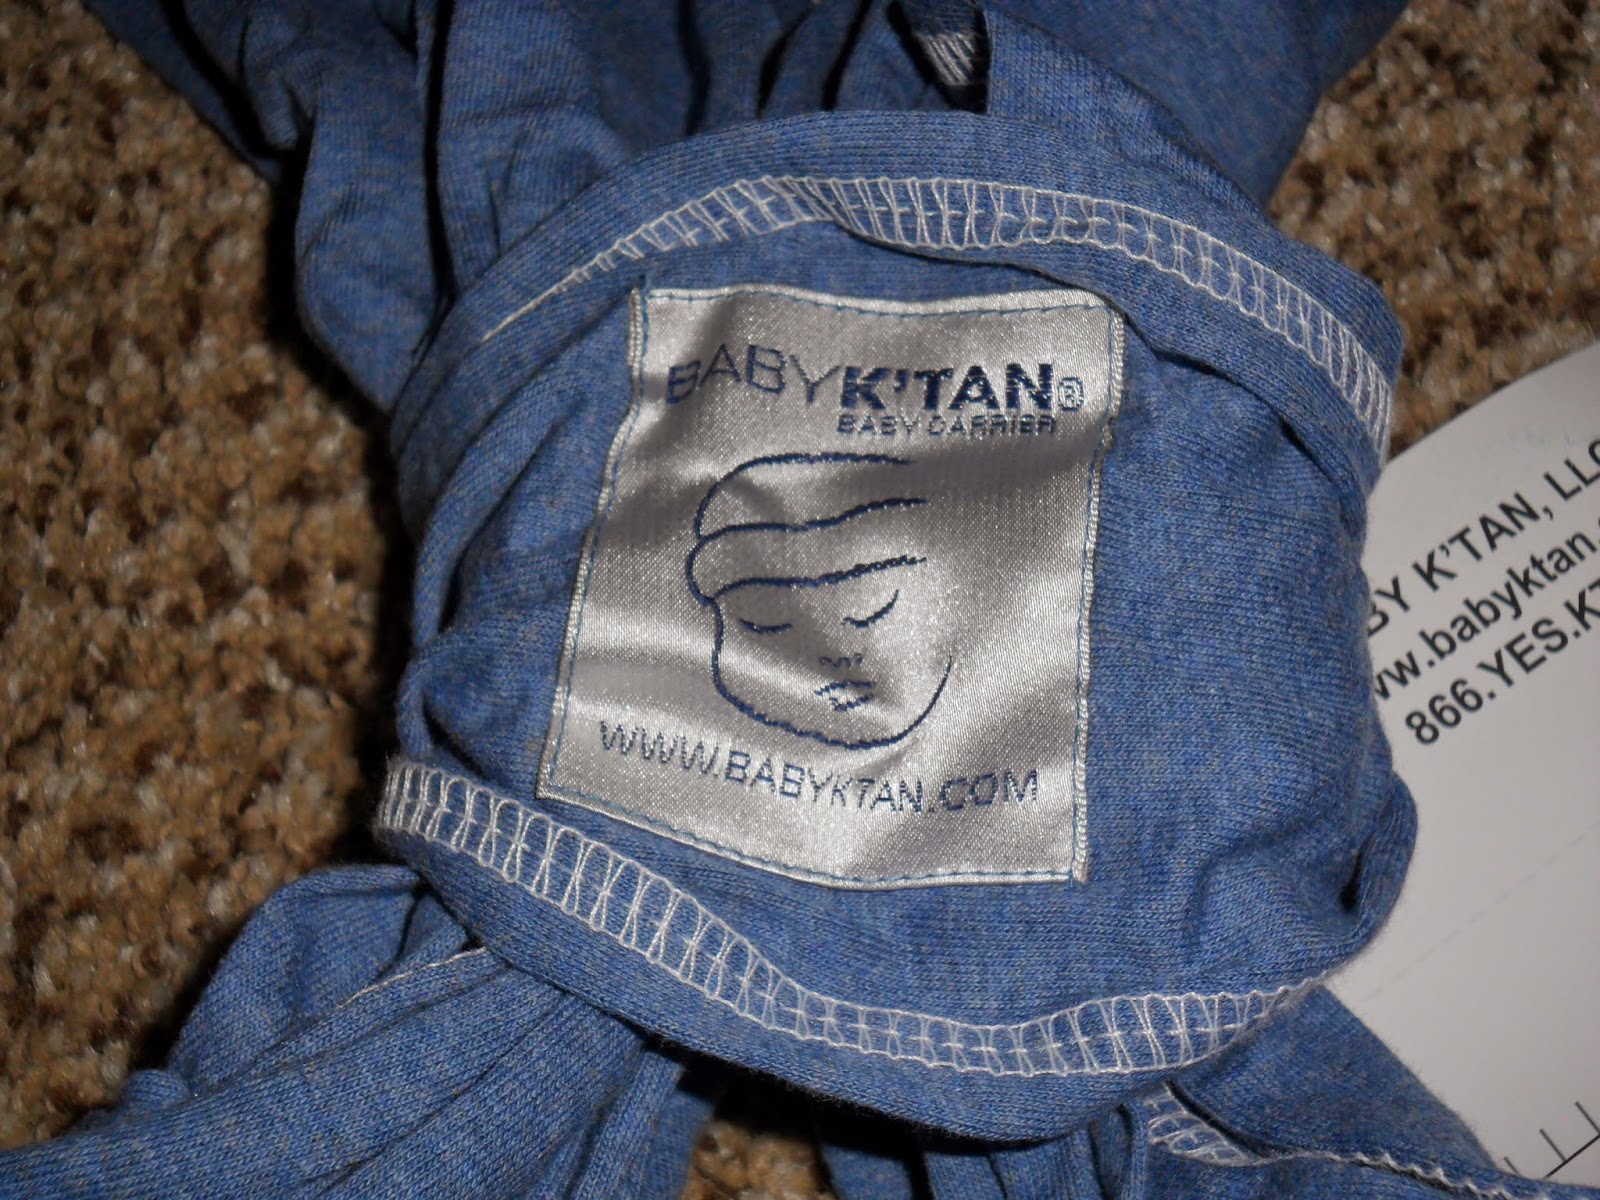 How to wear your baby with Baby K'tan. Review  (Blu me away or Pink of me Event)